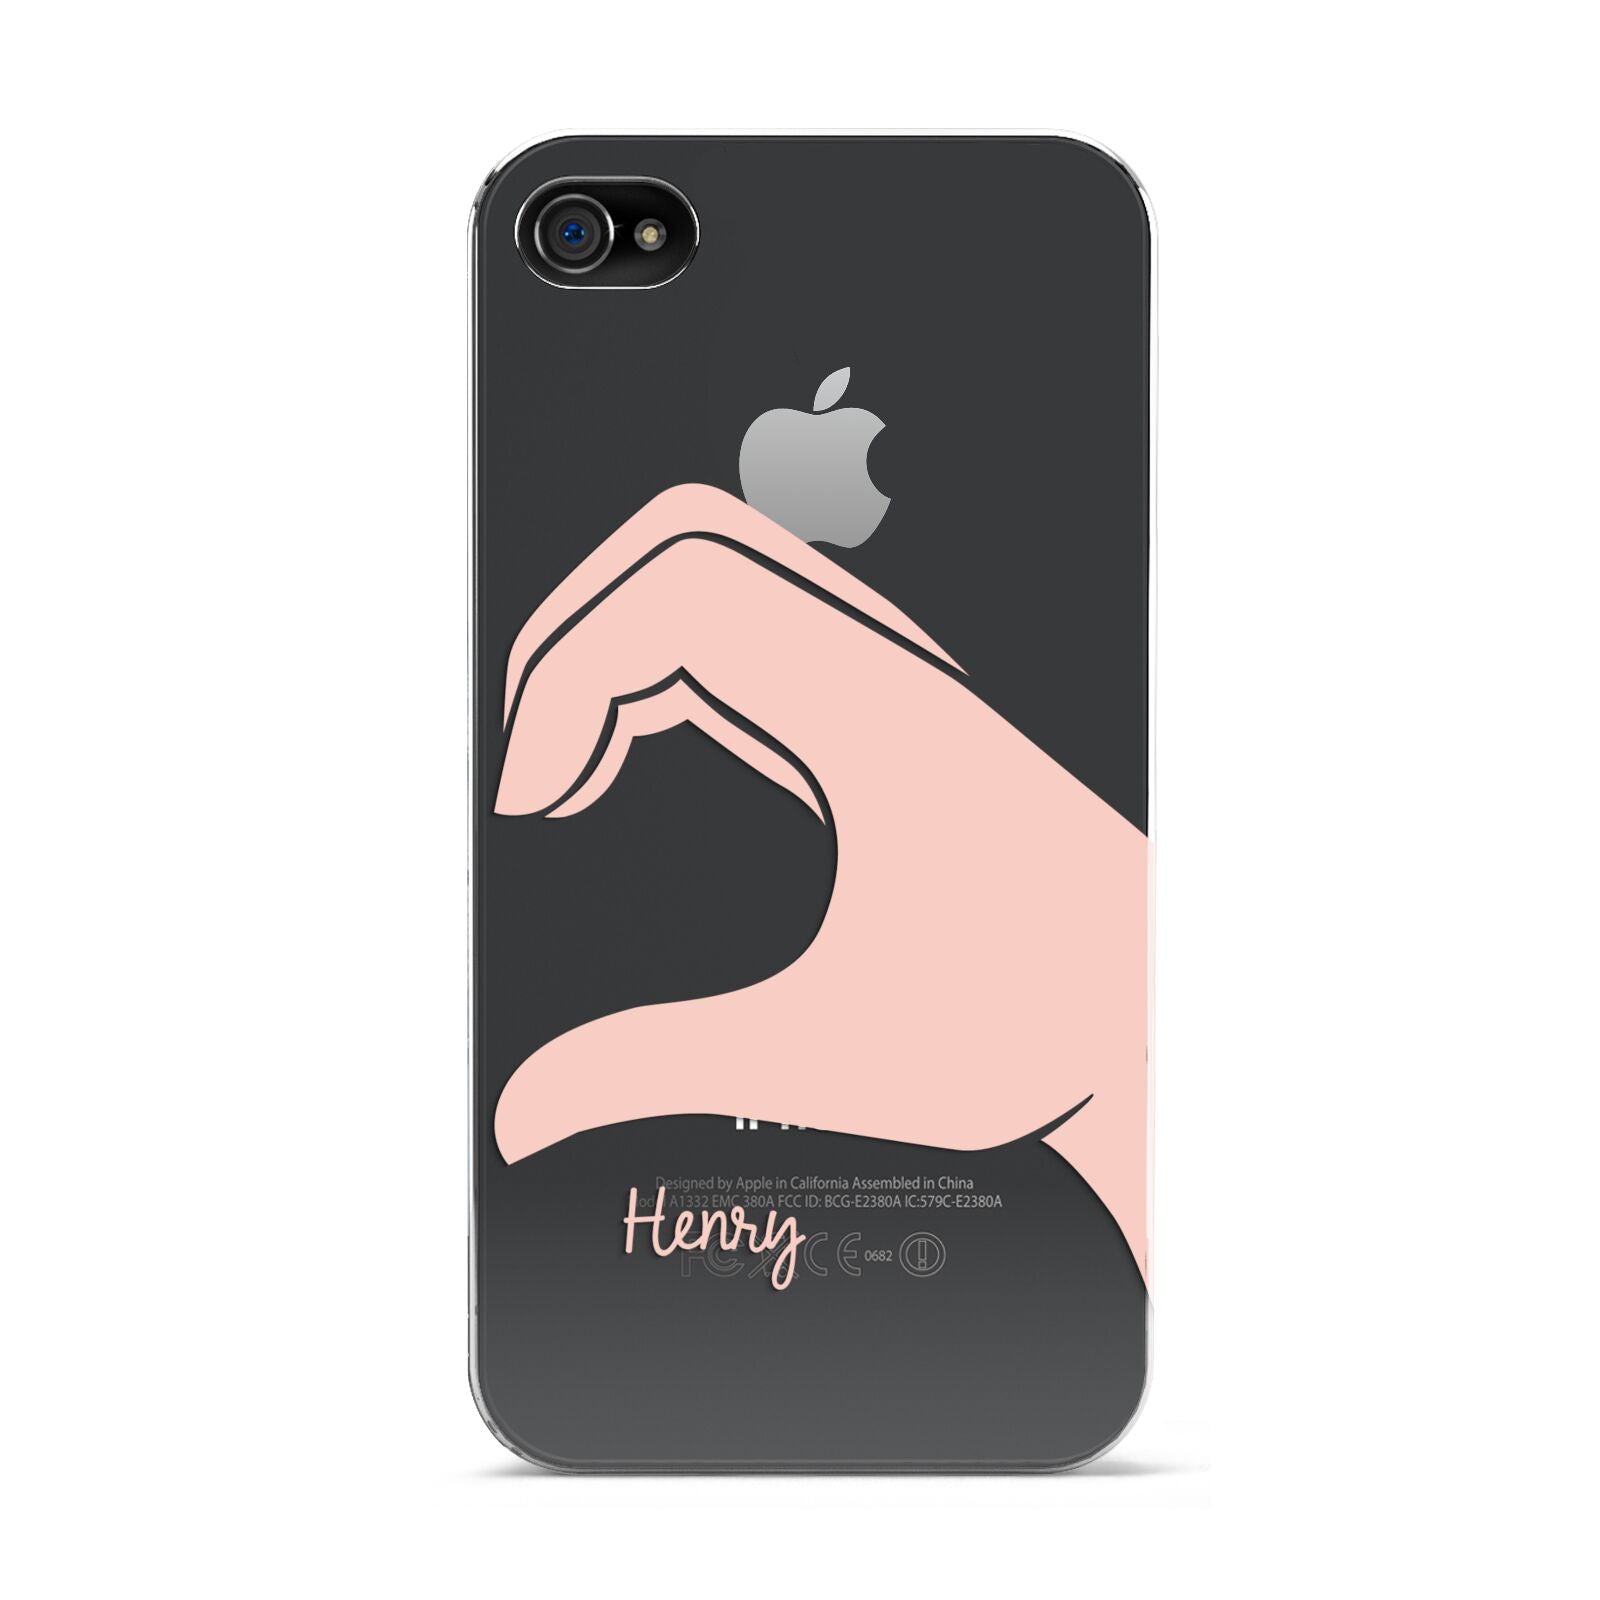 Right Hand in Half Heart with Name Apple iPhone 4s Case